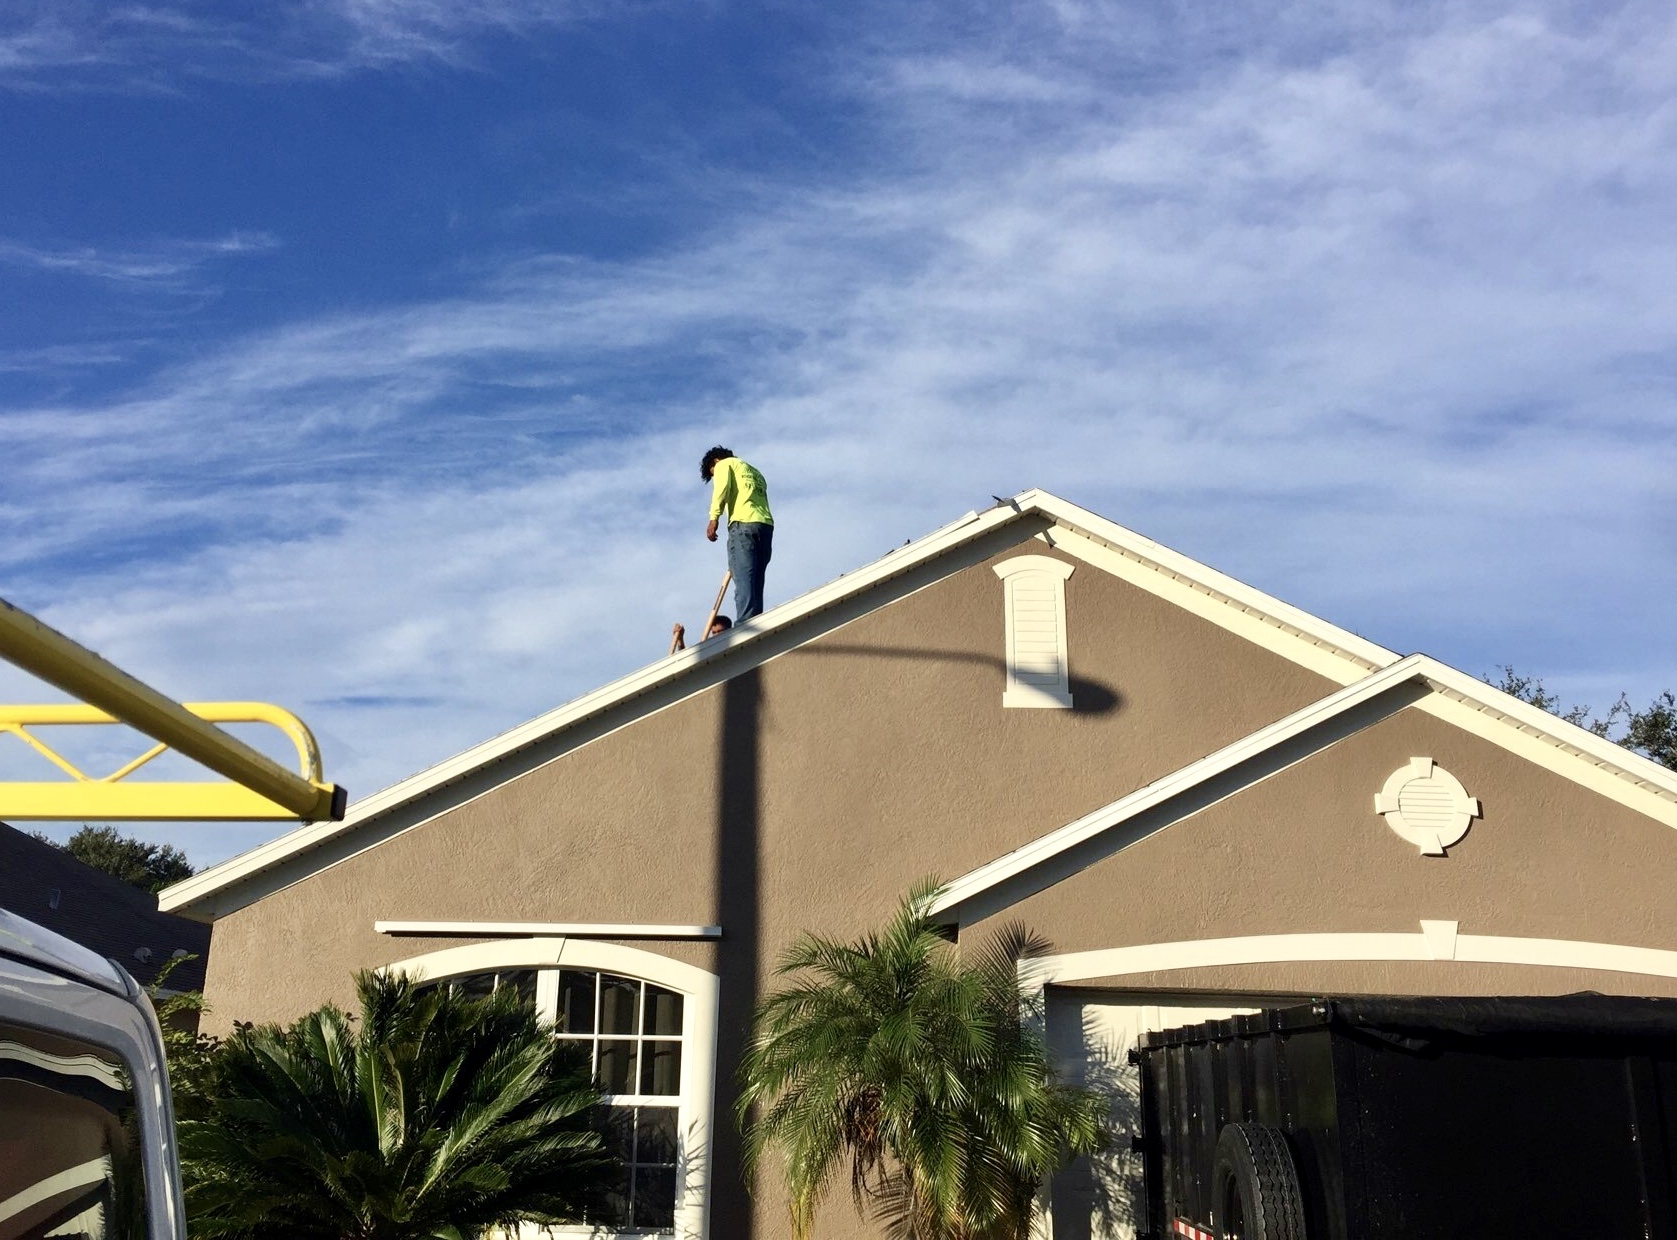 A Pit Crew team member on a client's roof